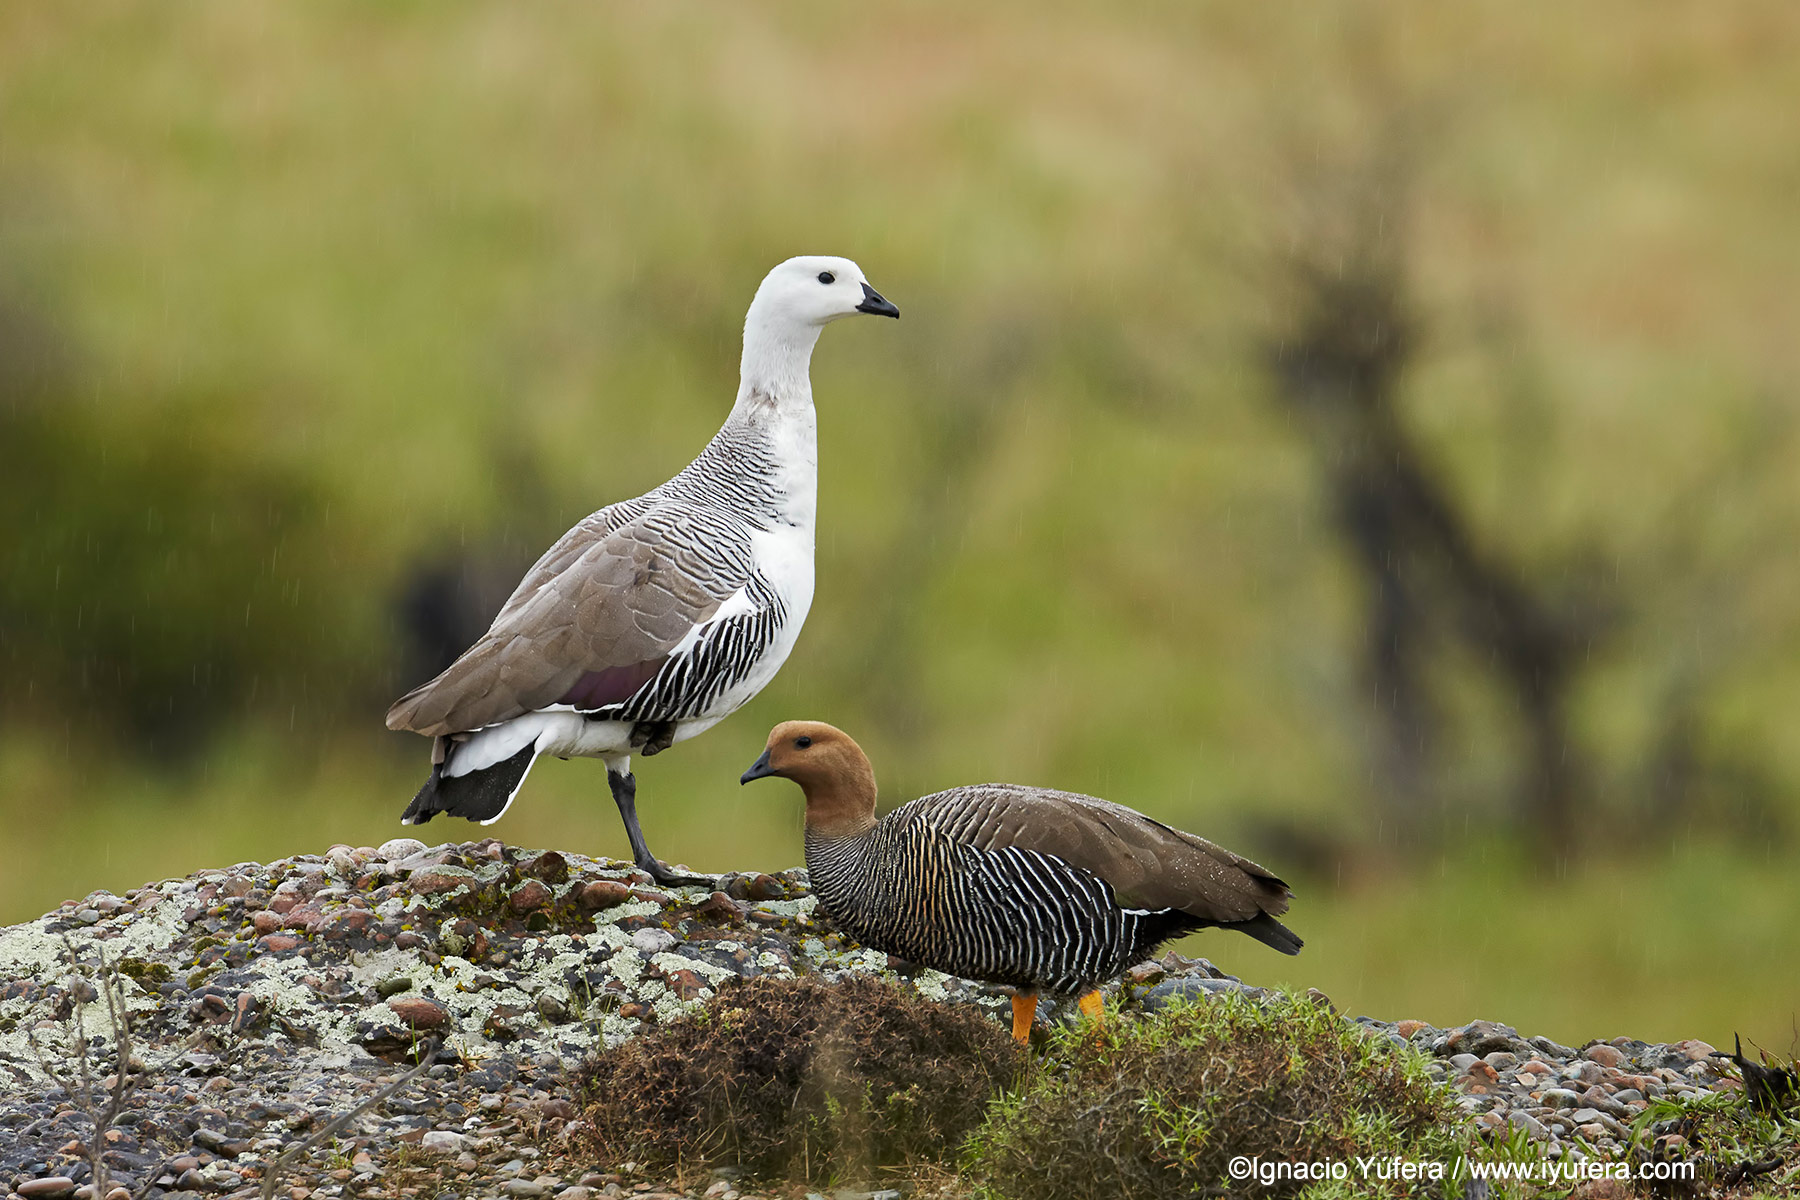 Upland geese